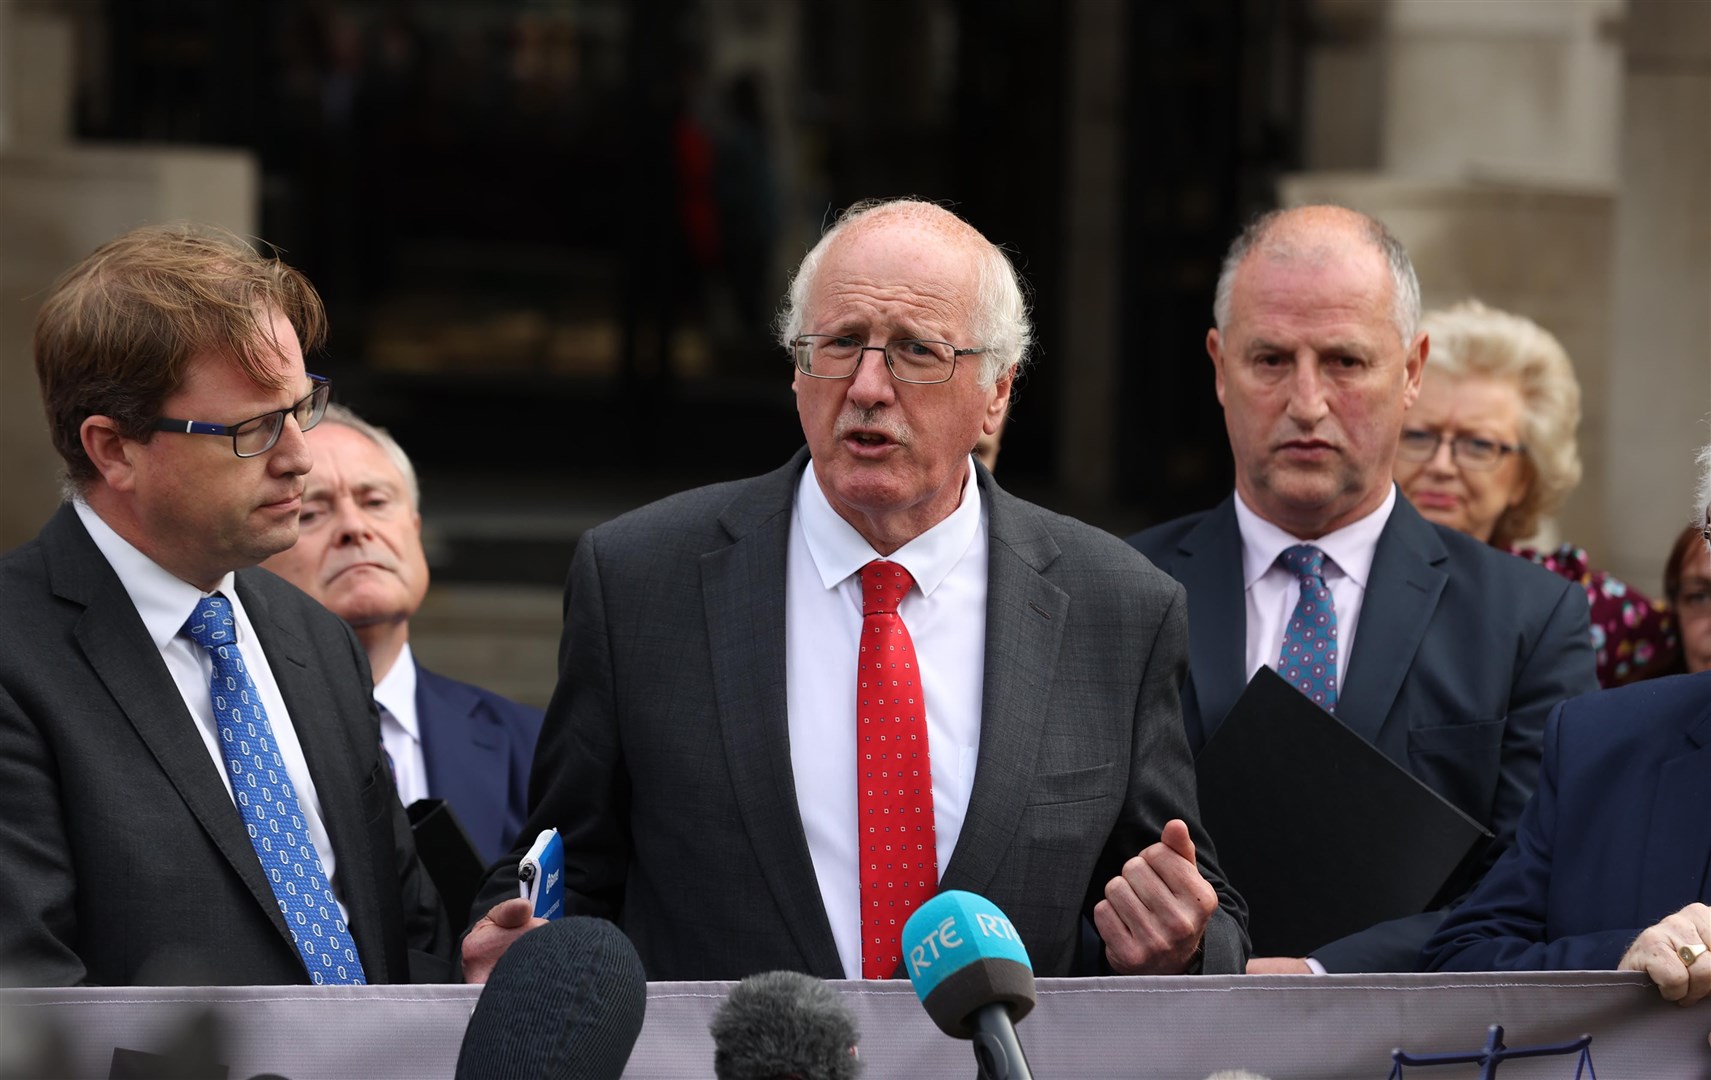 DUP MP Jim Shannon, centre, who asked former prime minister Tony Blair about how the Good Friday Agreement works in relation to the Windsor Framework (PA)